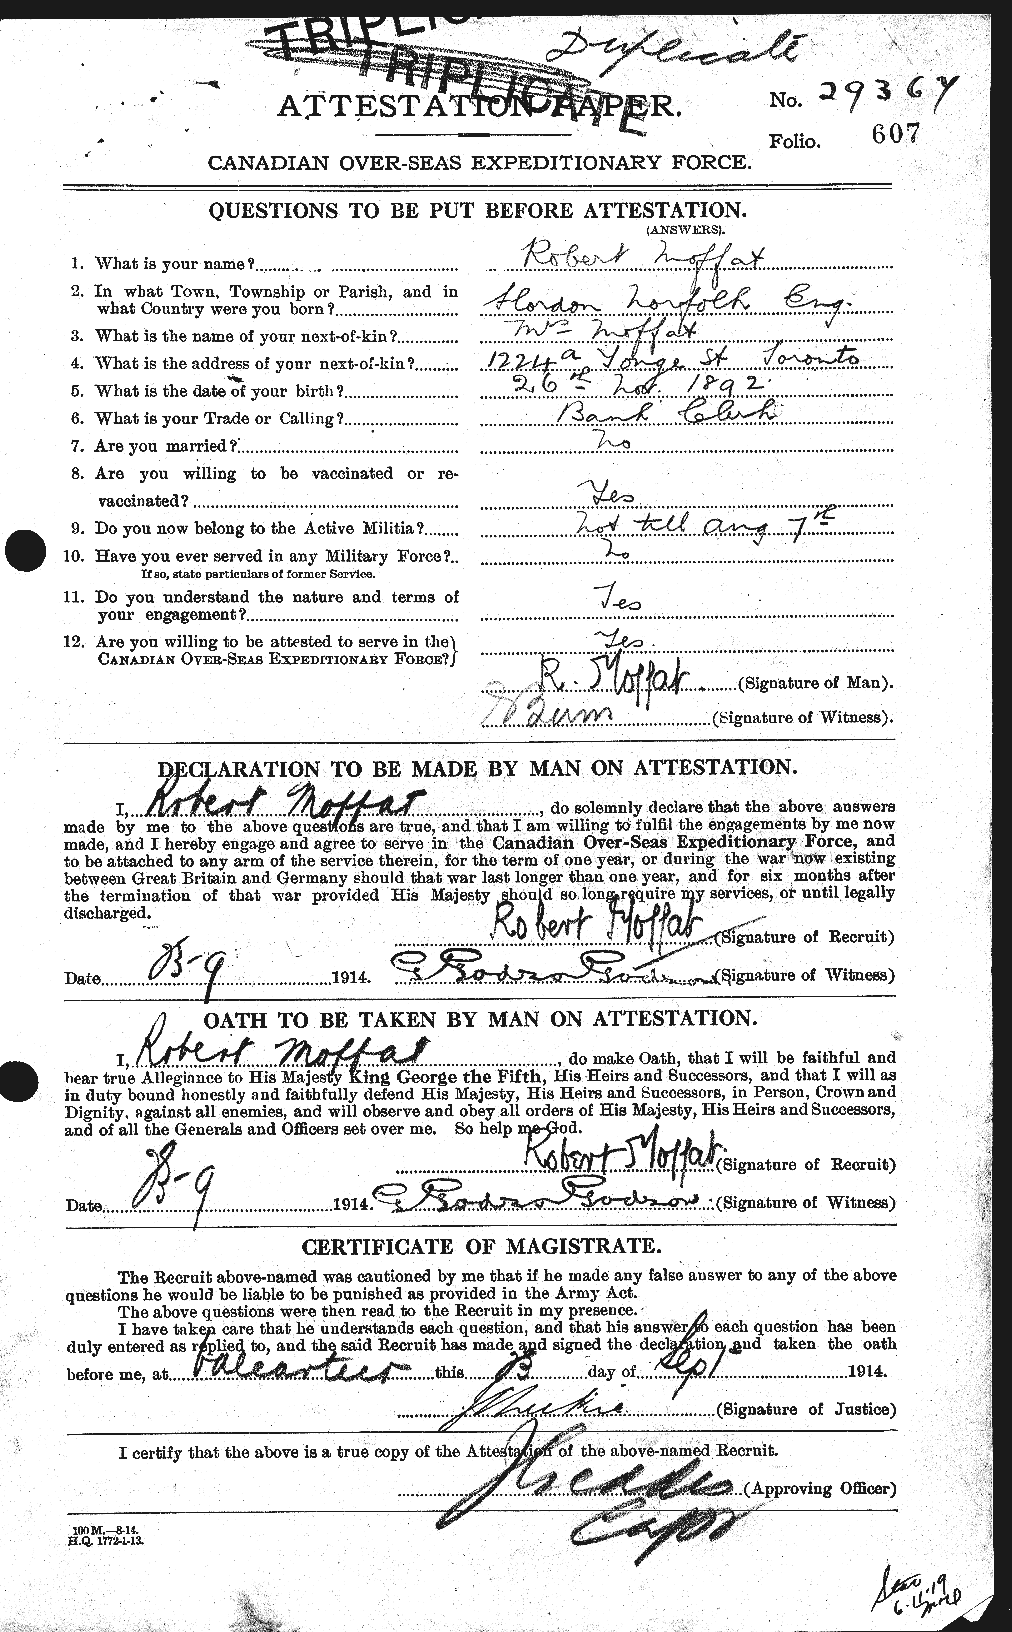 Personnel Records of the First World War - CEF 499061a